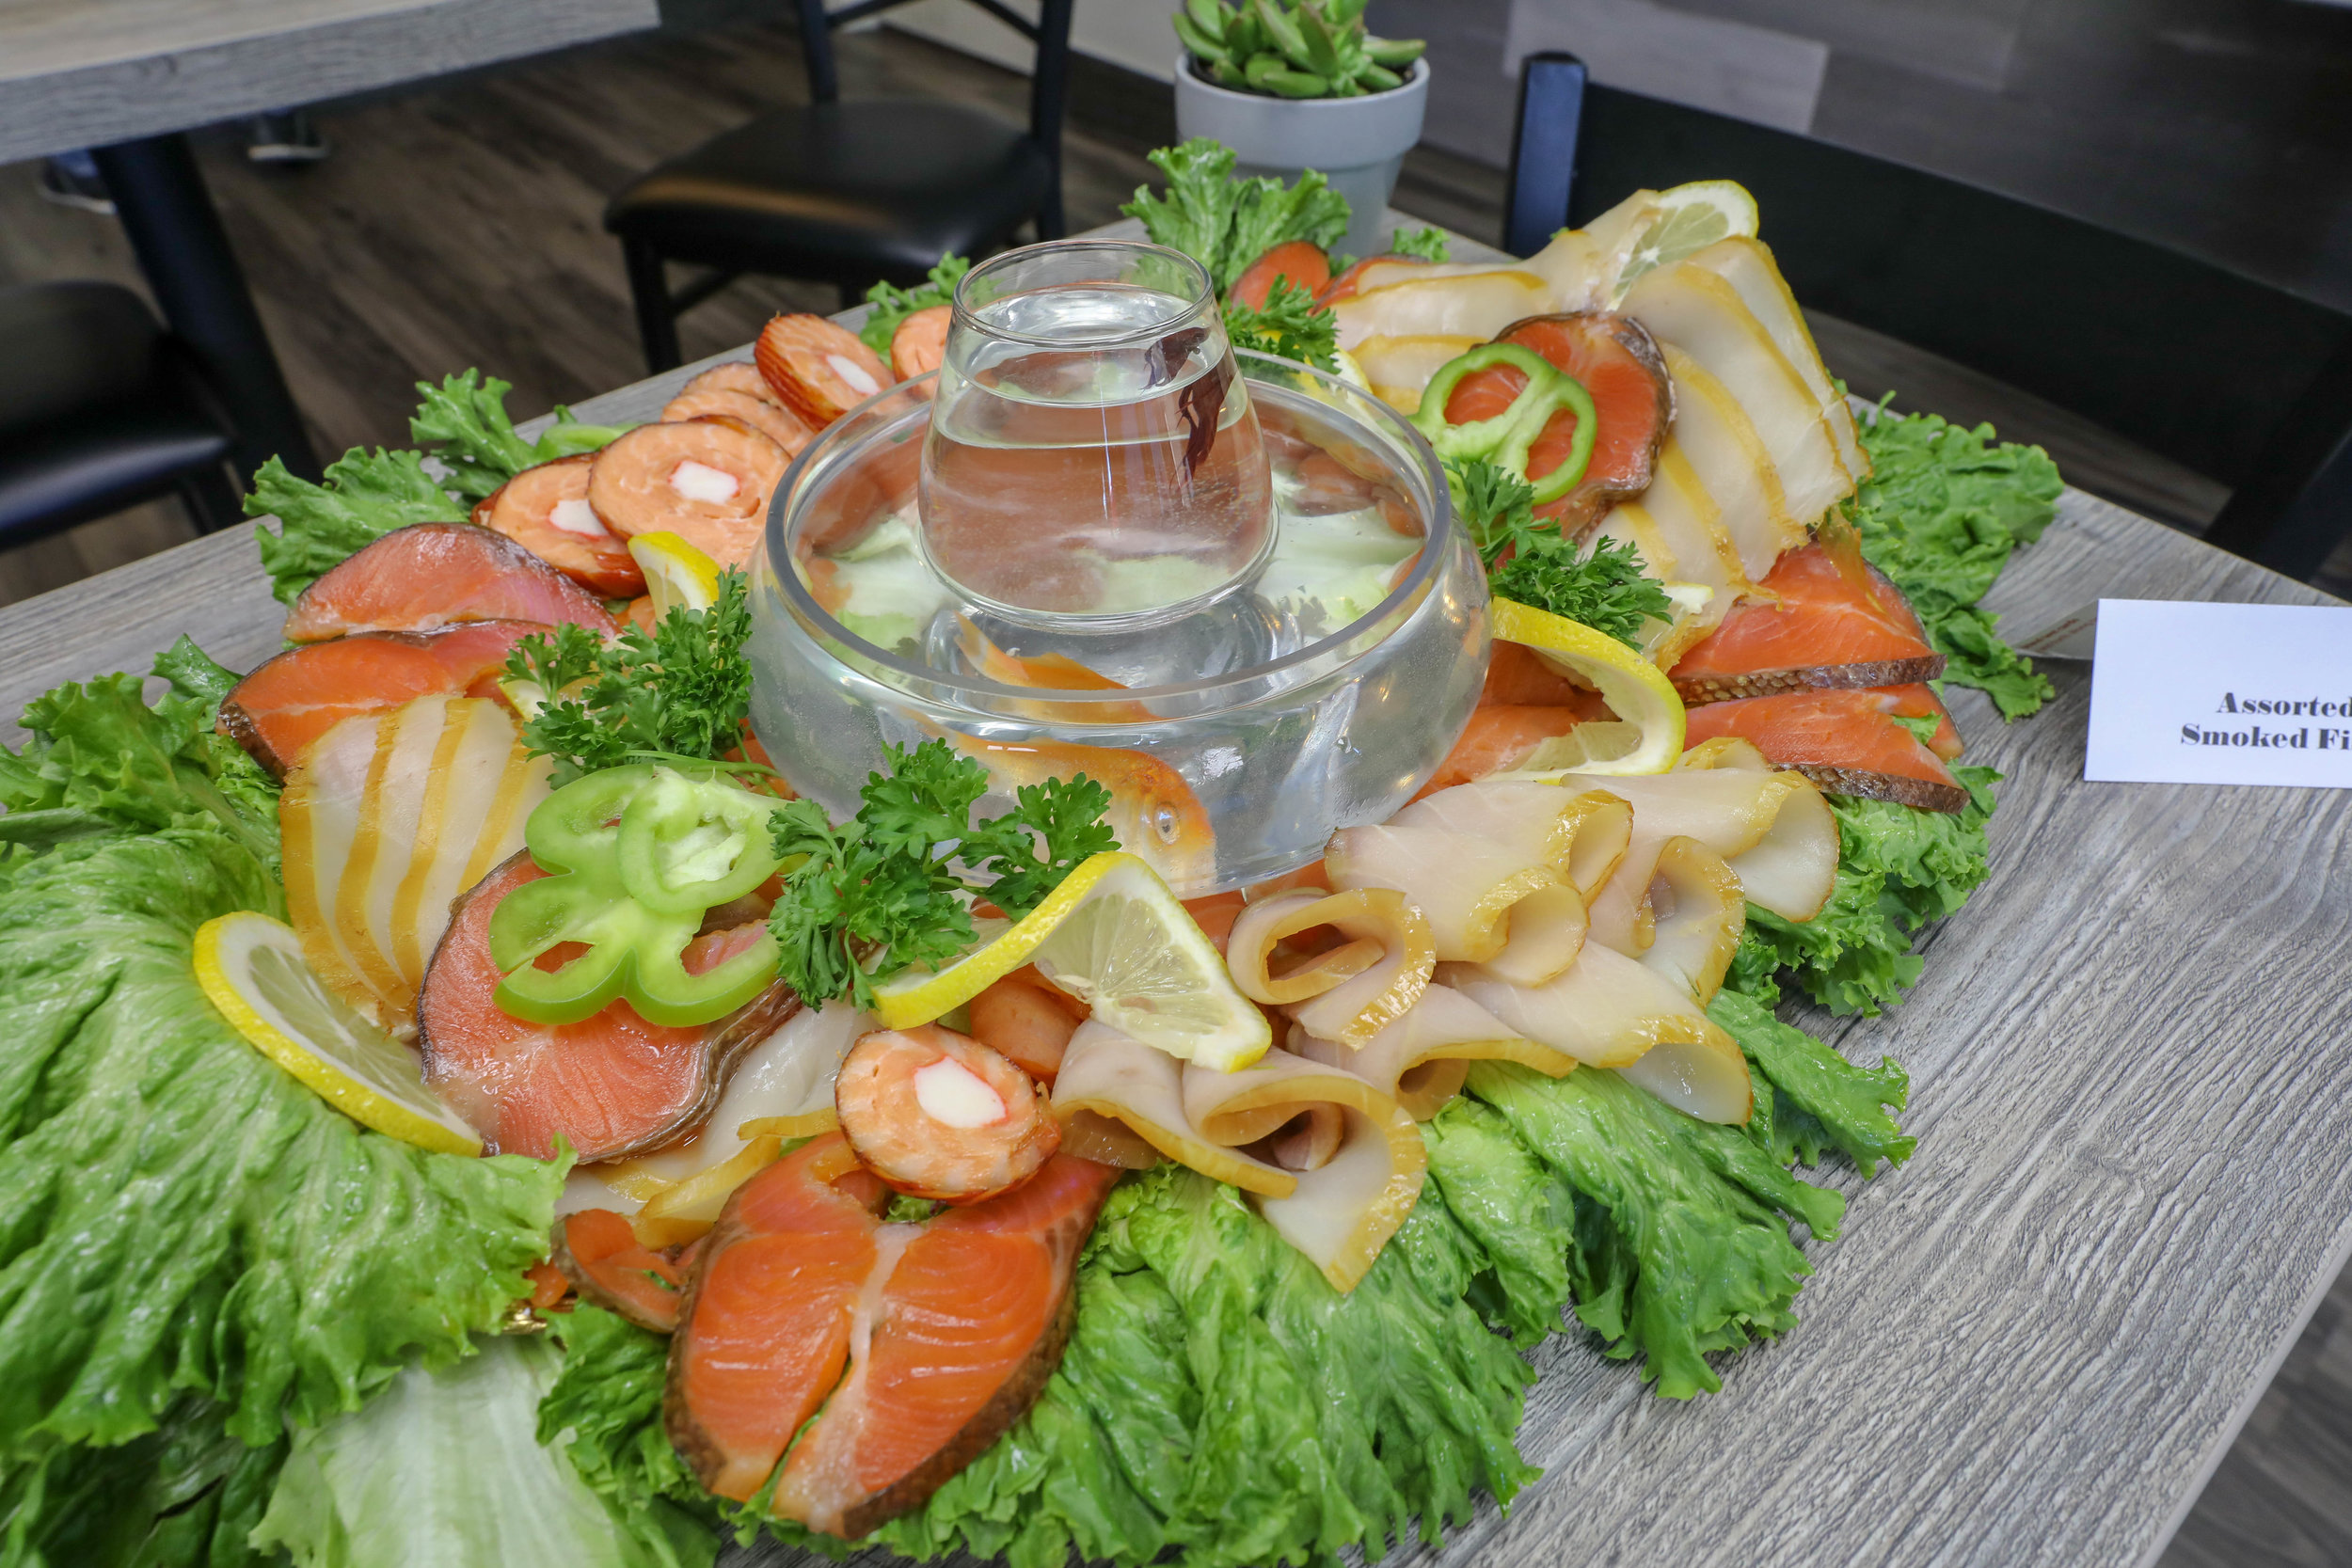  Assorted Smoked Fish Plate 